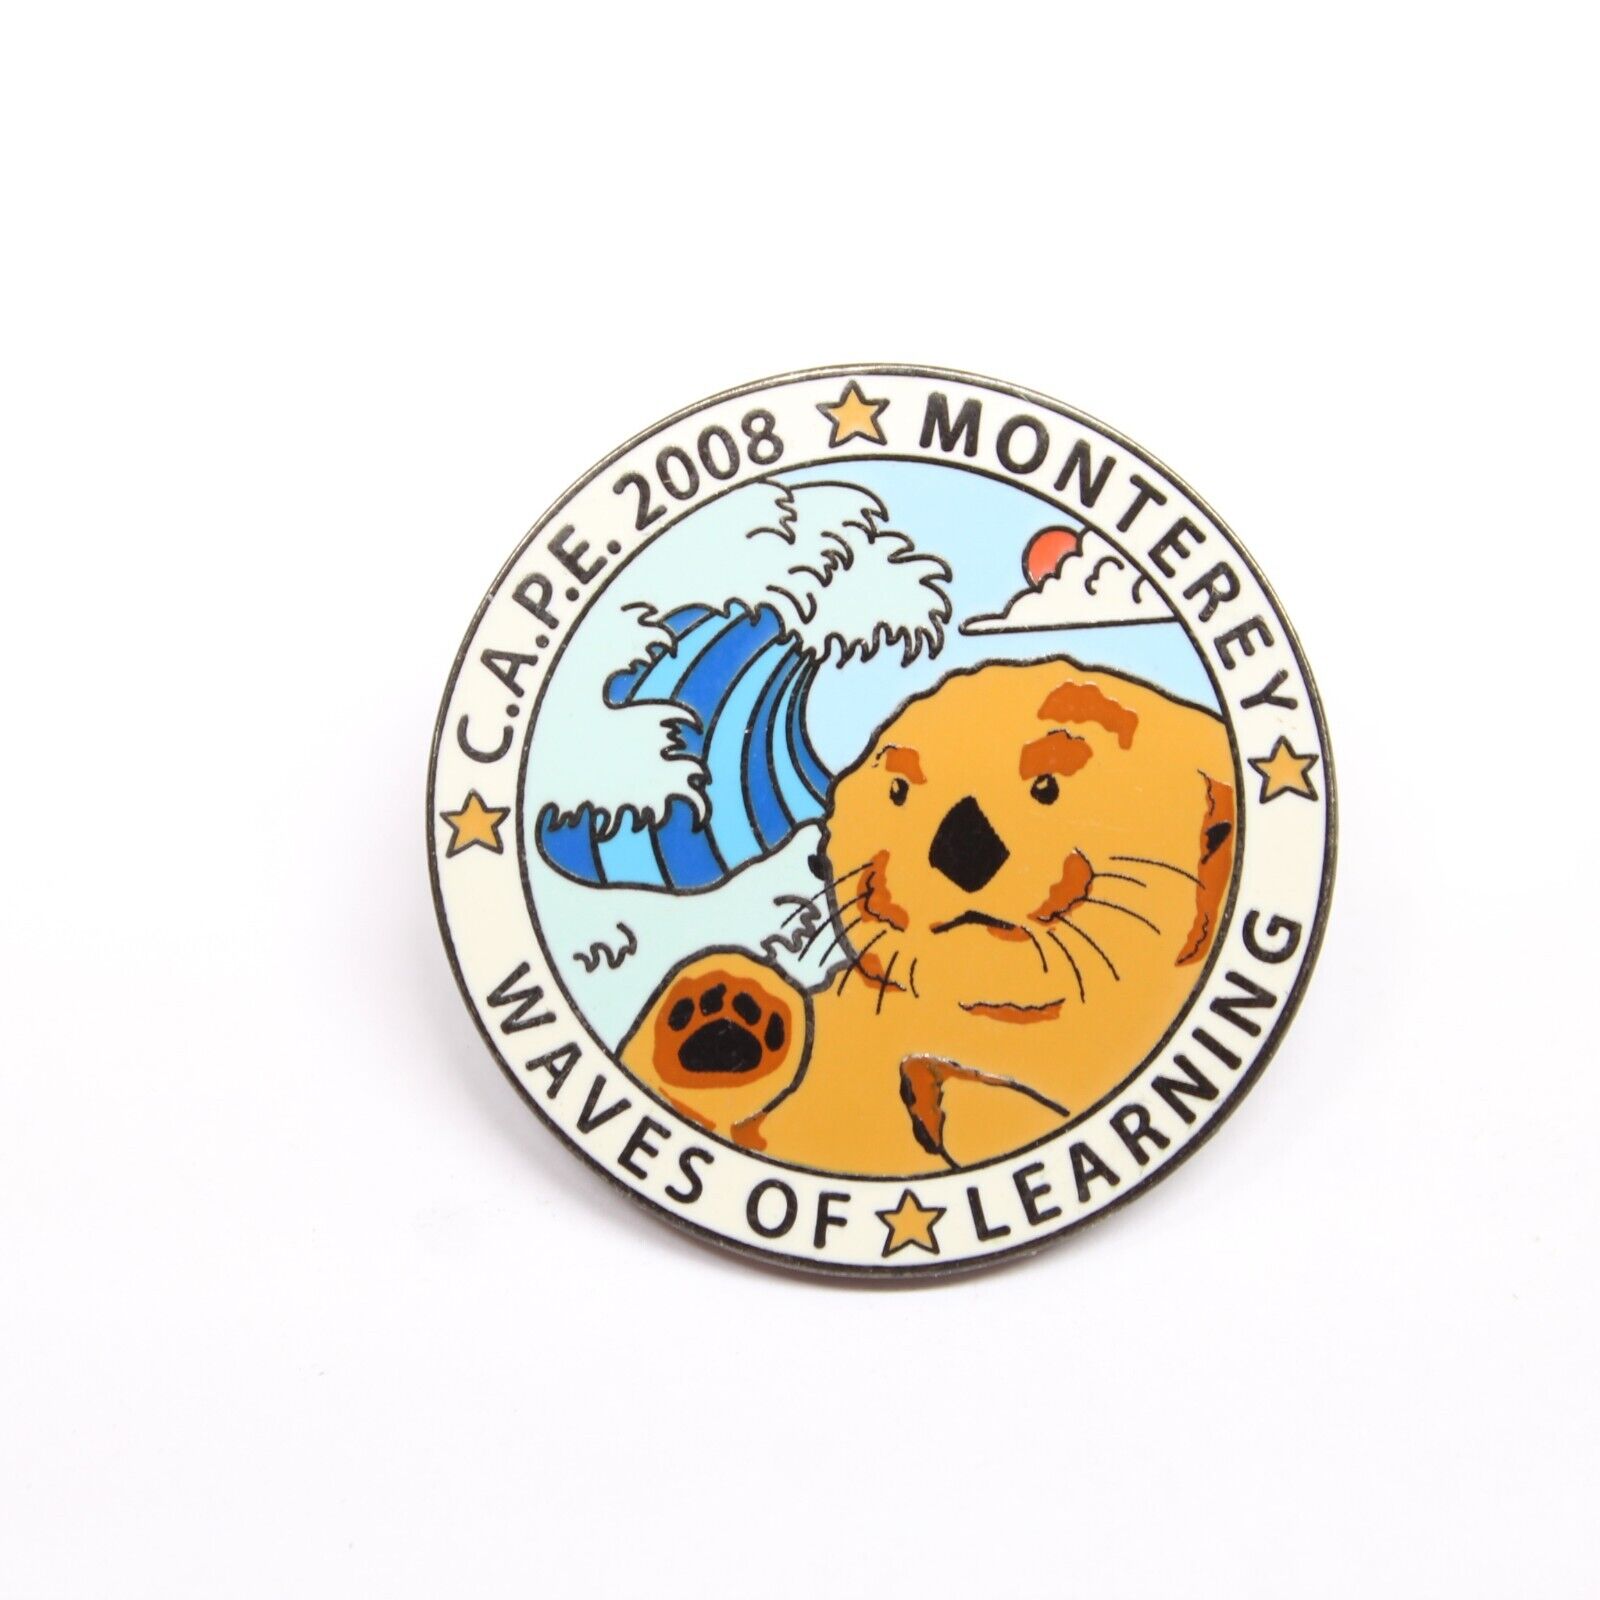 CAPE 2008 Monterey Waves of Learning Pin Lapel Enamel Collectible